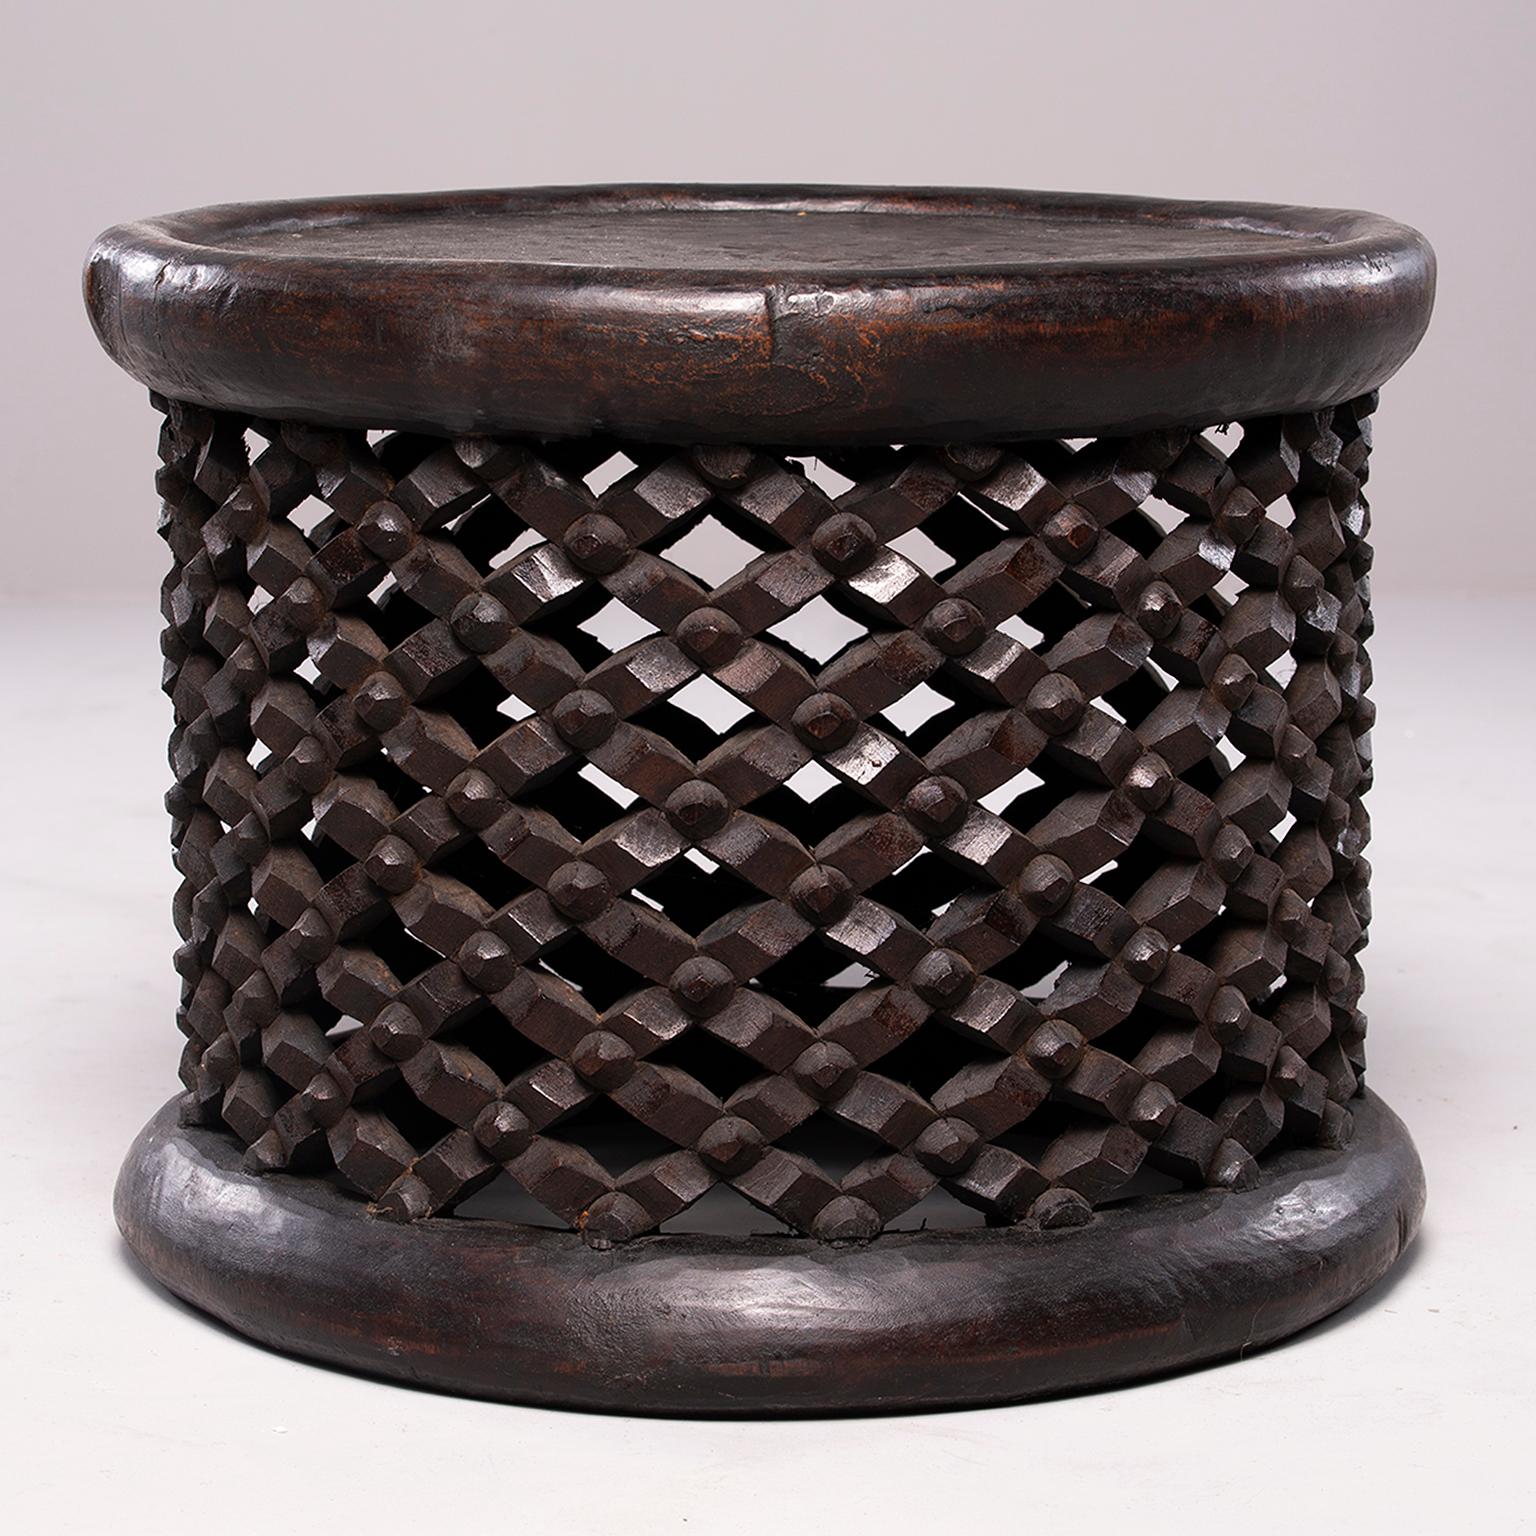 Handmade wood table from Cameroon is dark stained wood with round table top and carved lattice/grid pattern. Can be used as a side table or stool. Other similar pieces with variations in size/design available at the time of this posting.